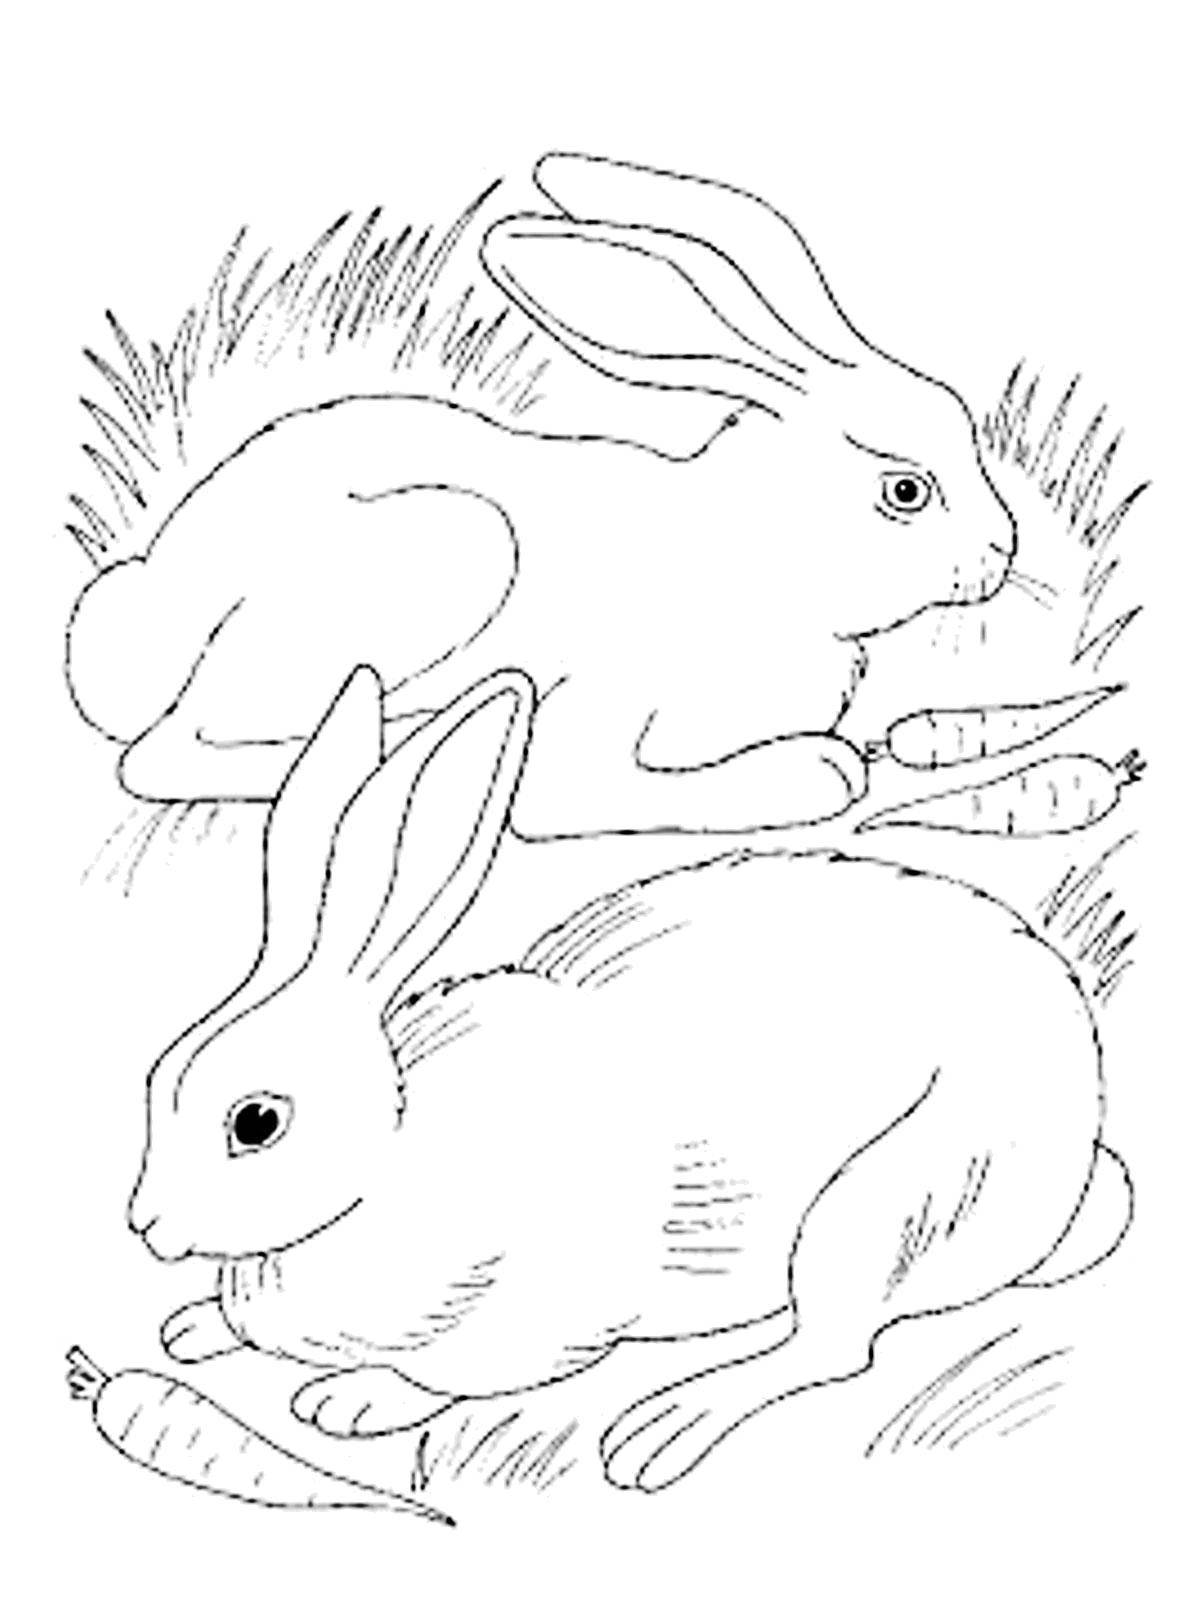 Coloring Bunnies with Moskovskoy. Category Pets allowed. Tags:  Animals, Bunny.